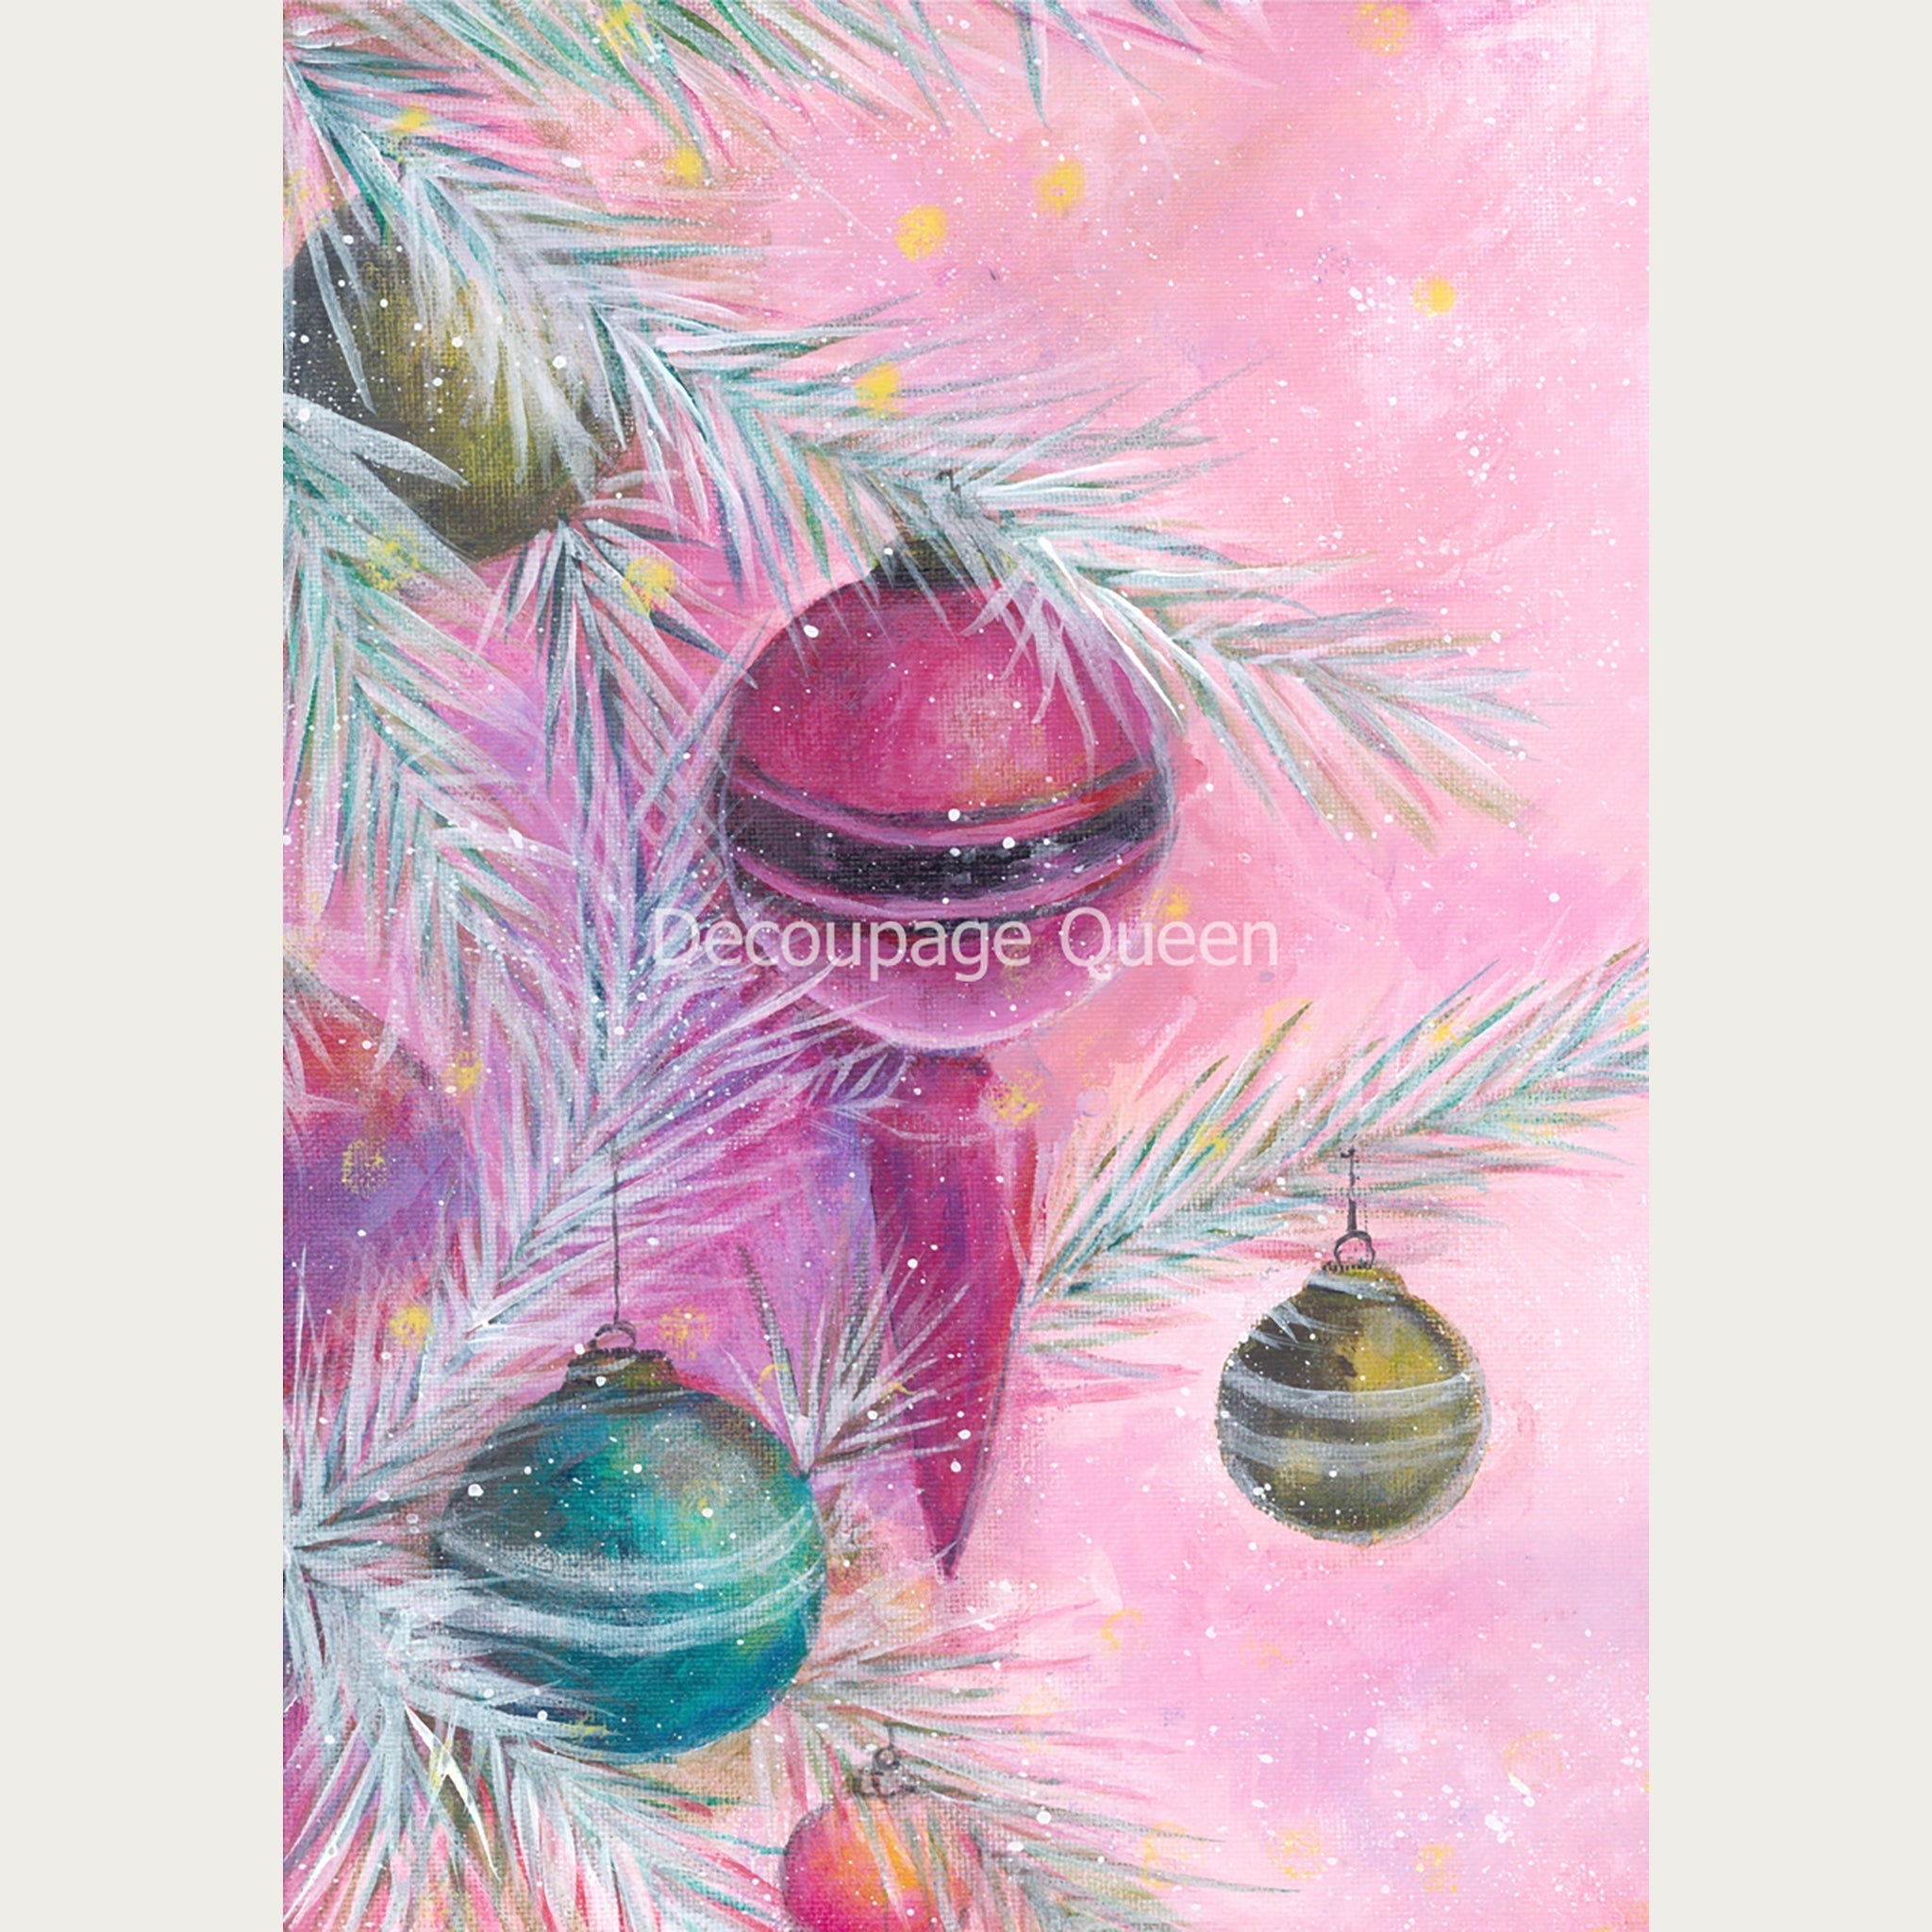 Hand painted style A0 rice paper design of ornaments and on a pine branch on a soft pink background. White borders are on the sides.